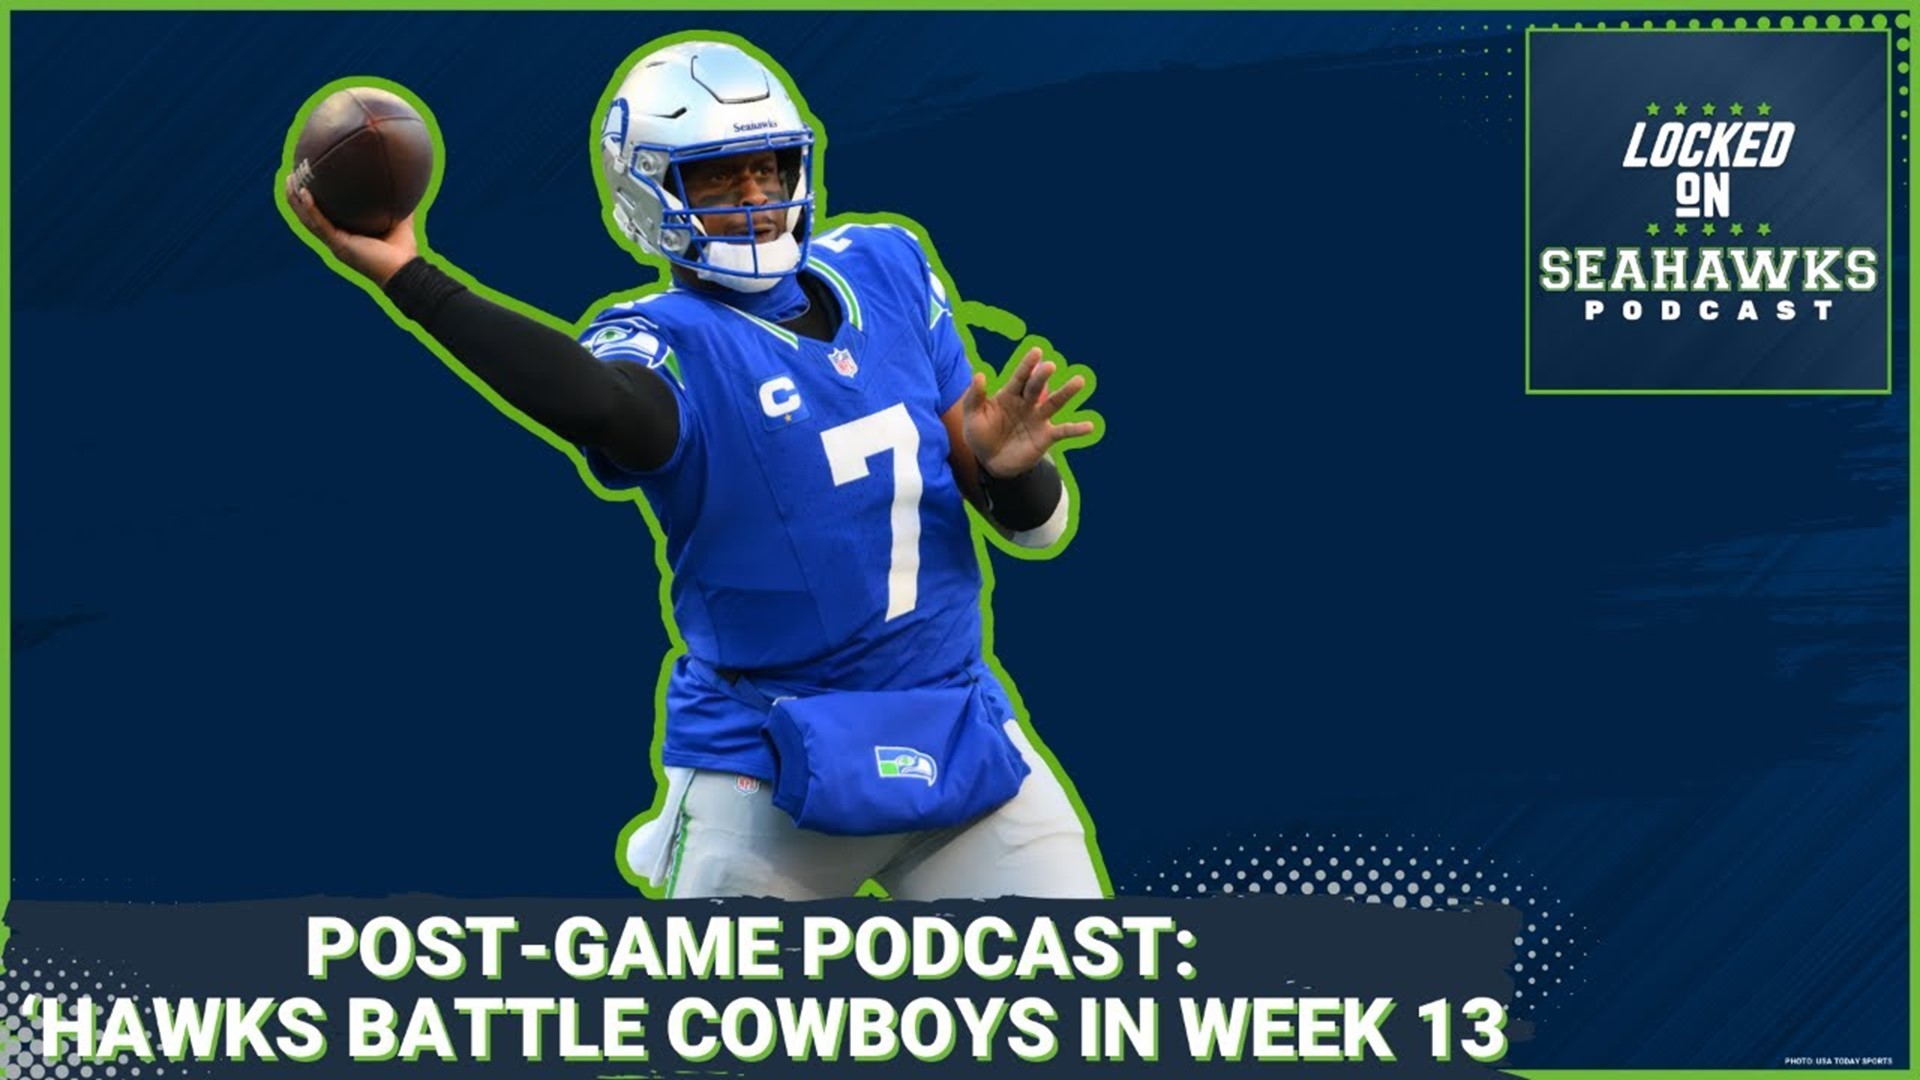 Reporter Corbin Smith dishes his key takeaways and analysis following the Seahawks Week 13 road game against the Cowboys, including his weekly game ball winners